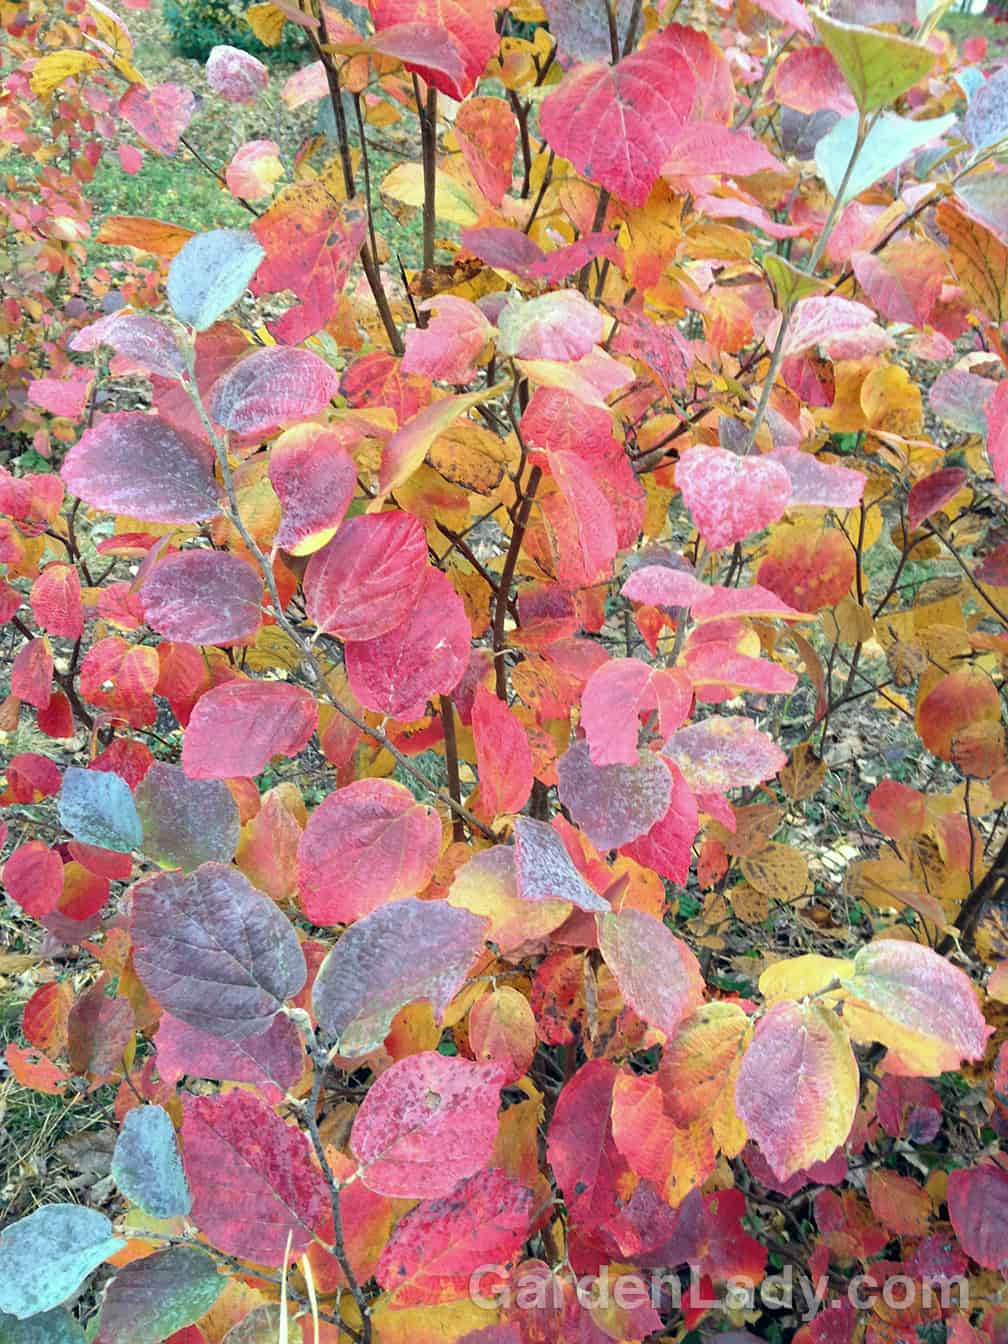 Even as we feel sorry that the days grow shorter, Fothergilla Blue Shadow has the ability to cheer us up.